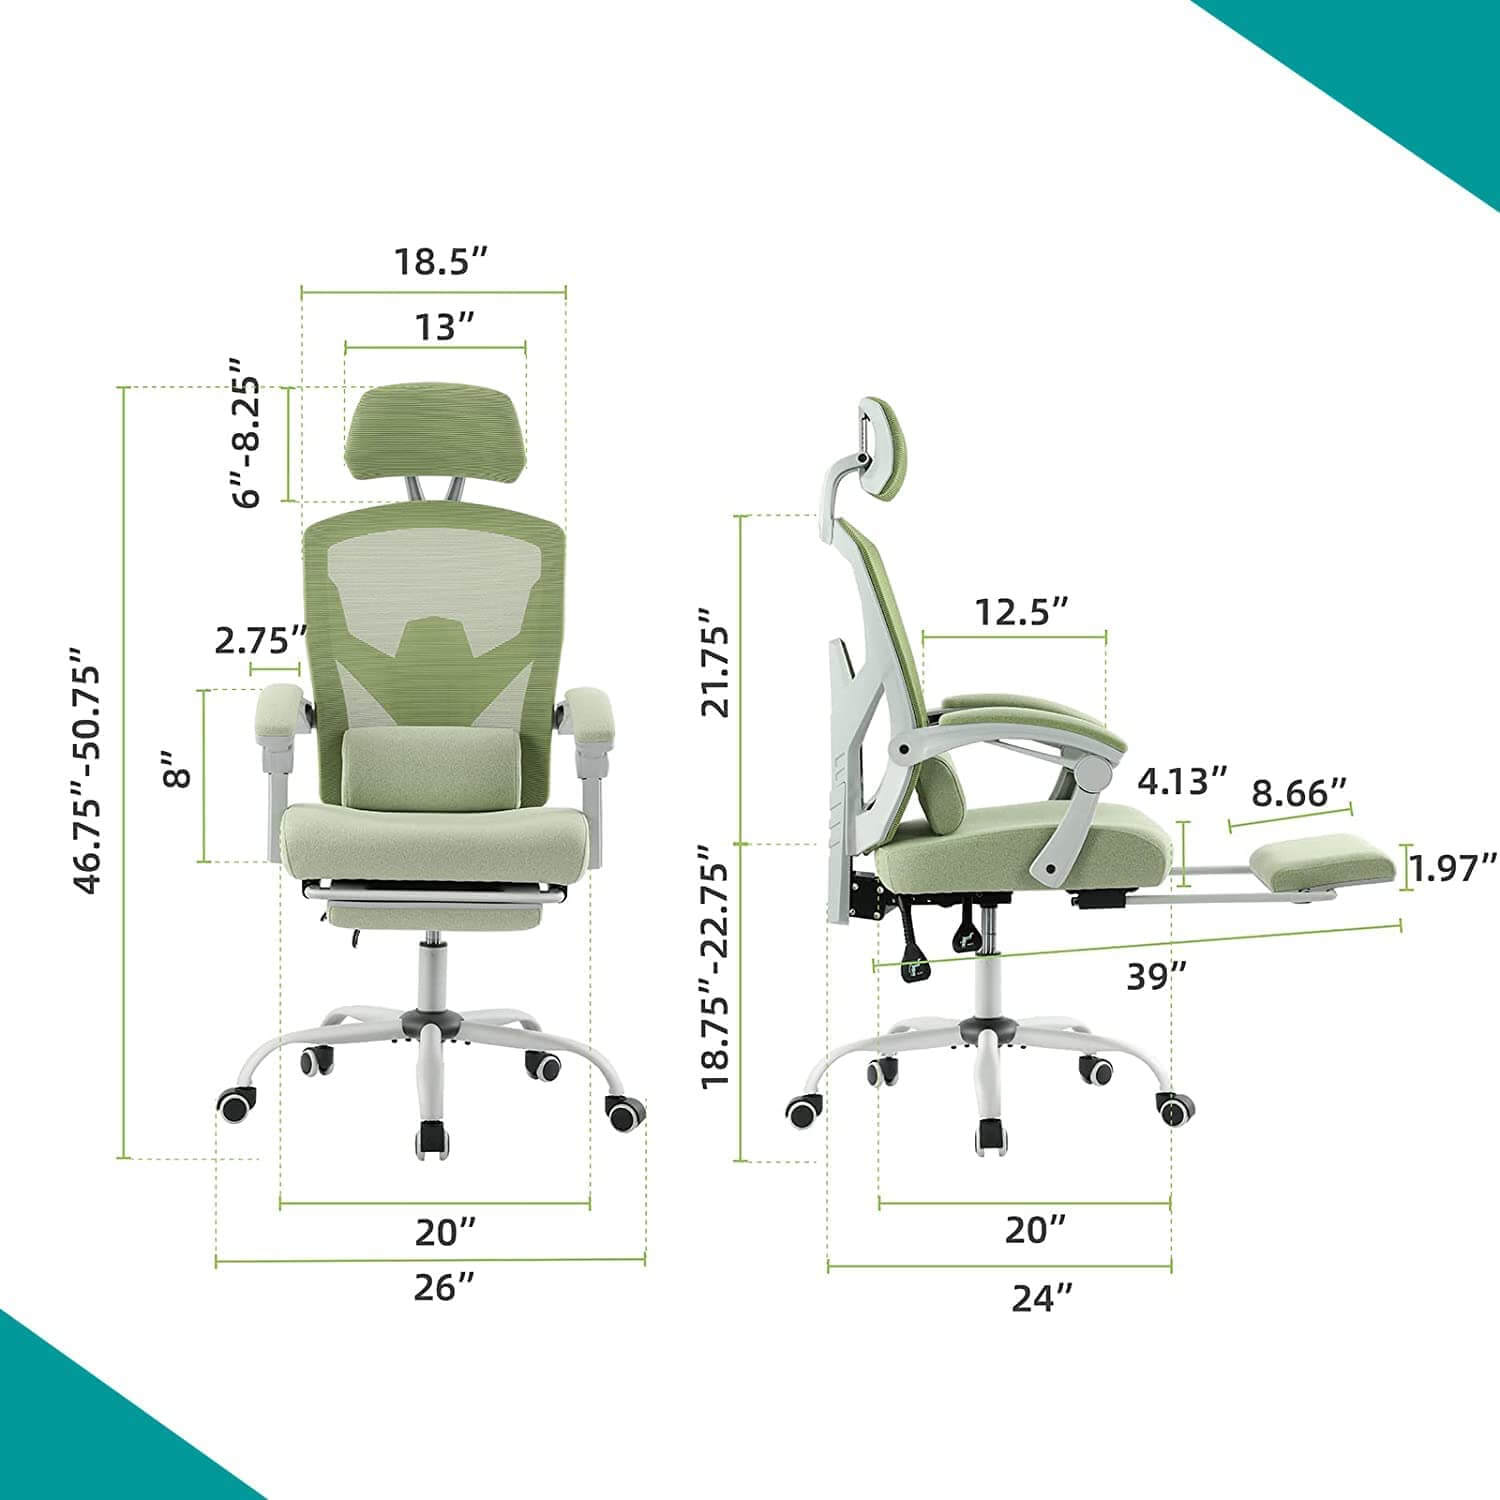 retractable-footrest-swivel-office-chair#Color_Green